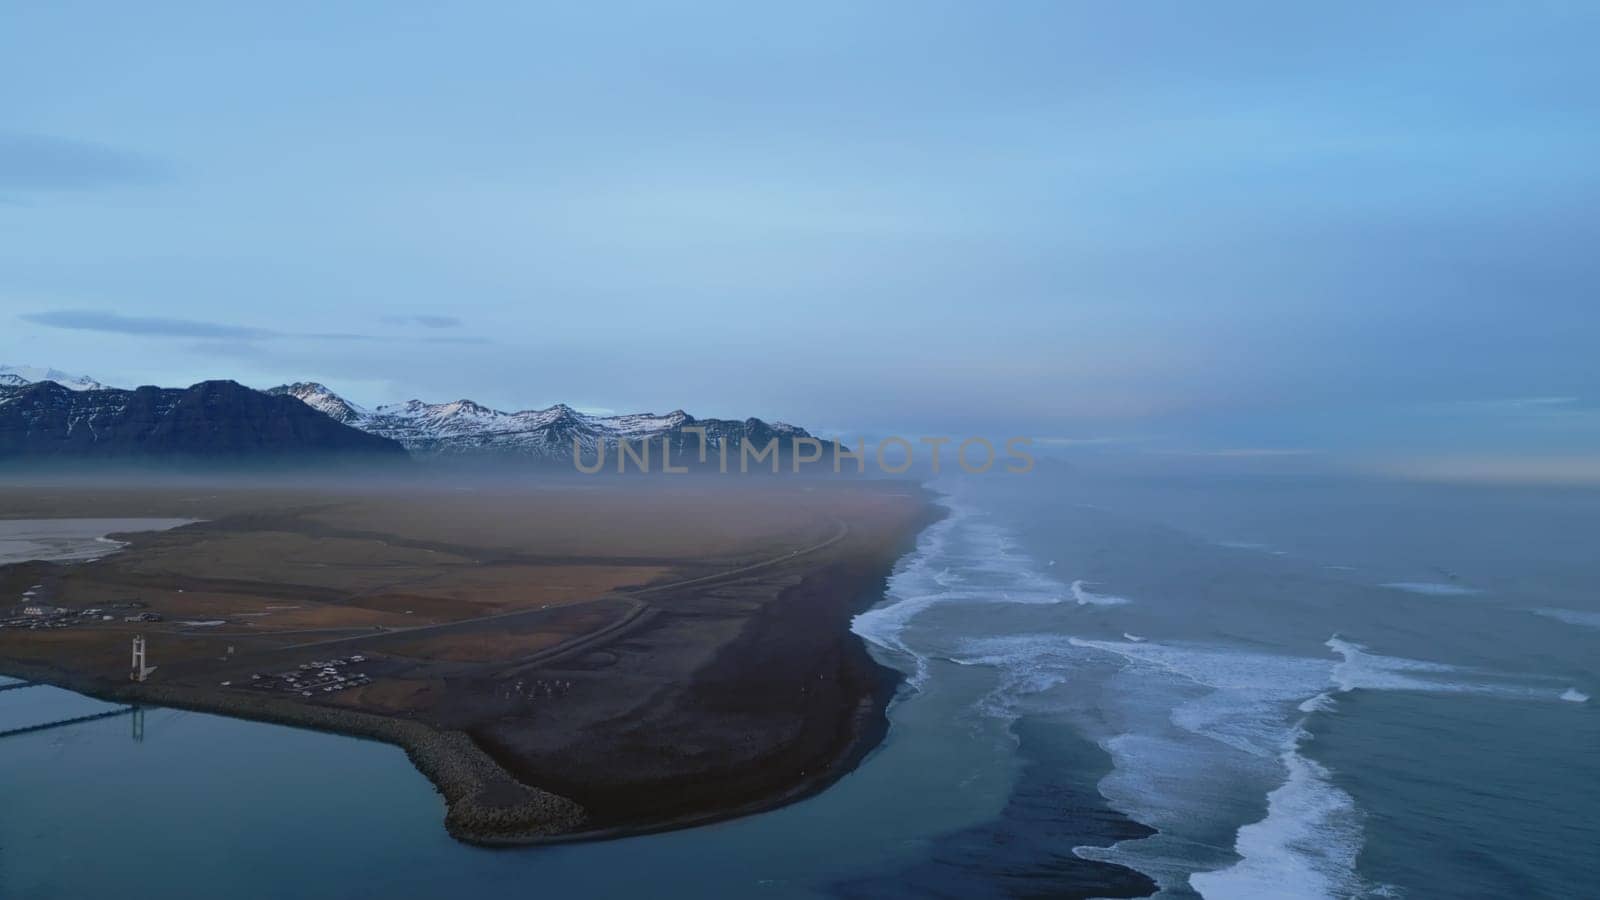 Aerial view of icelandic coastline with famous black sand beach and nordic scenery, snowy mountains and hills. Beautiful altantic ocean shore with roadside, natural panoramic view. Slow motion.